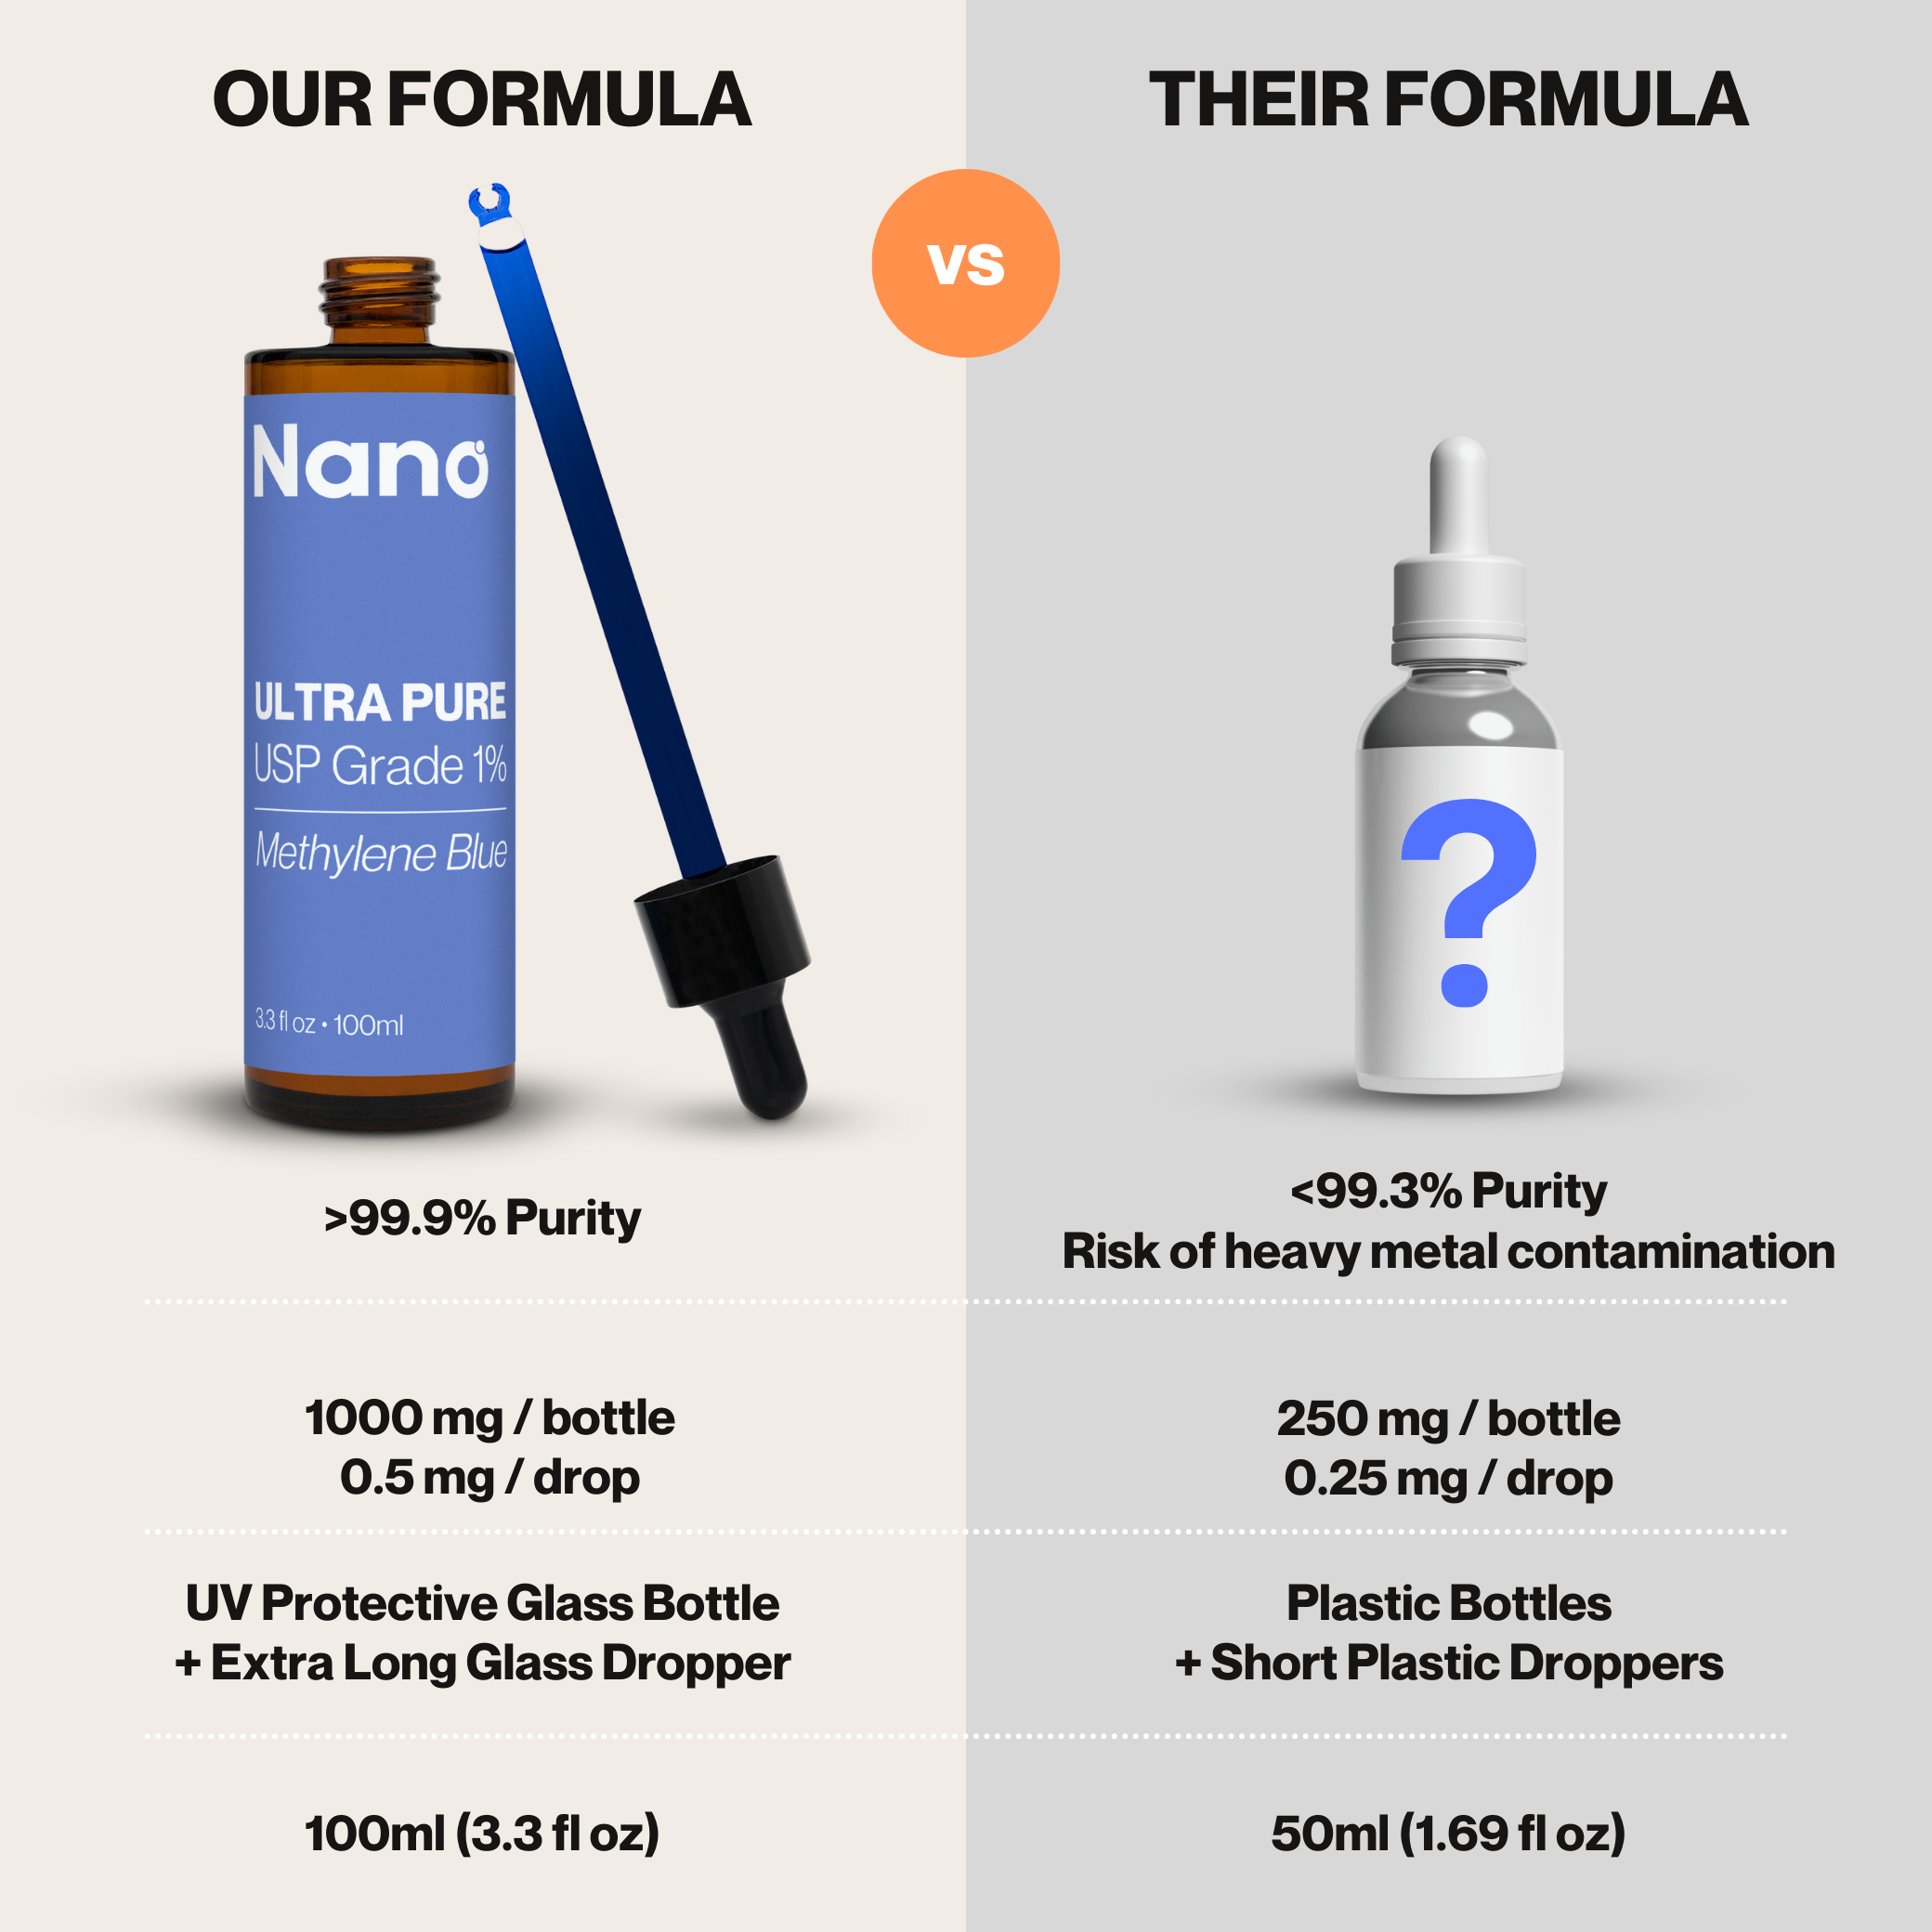 Nano ultra pure USP grade 1% Methylene Blue vs competitor side by side comparison. Greater than 99.9% purity vs less than 99.3% purity. 1000/mg per bottle vs 250 mg per bottle. UV protective glass bottle + extra long glass dropper vs plastic bottle + short plastic dropper. 100ml vs 50ml